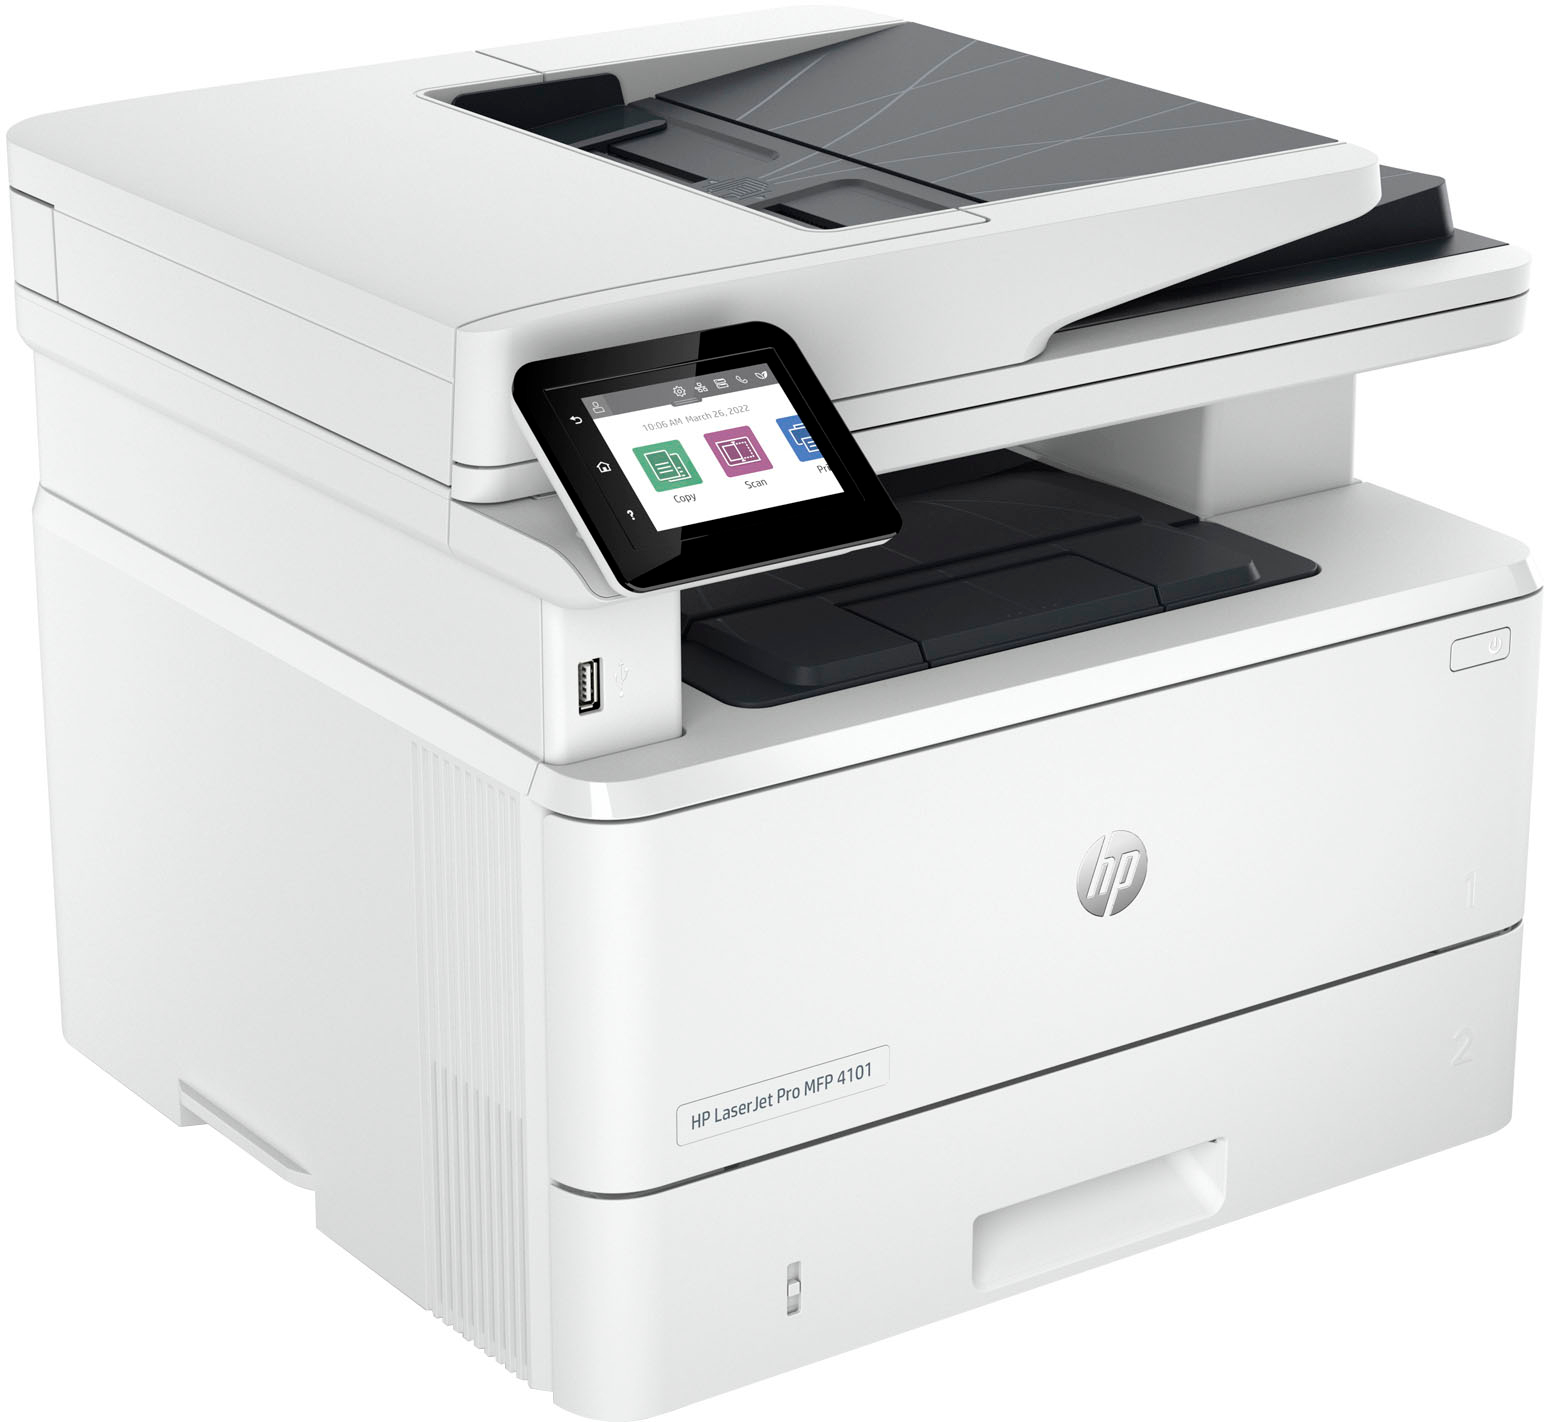 Angle View: HP - LaserJet Pro MFP 4101fdwe Wireless All-In-One Black-and-White Laser Printer with 3 mo. of Instant Ink included with HP+ - White